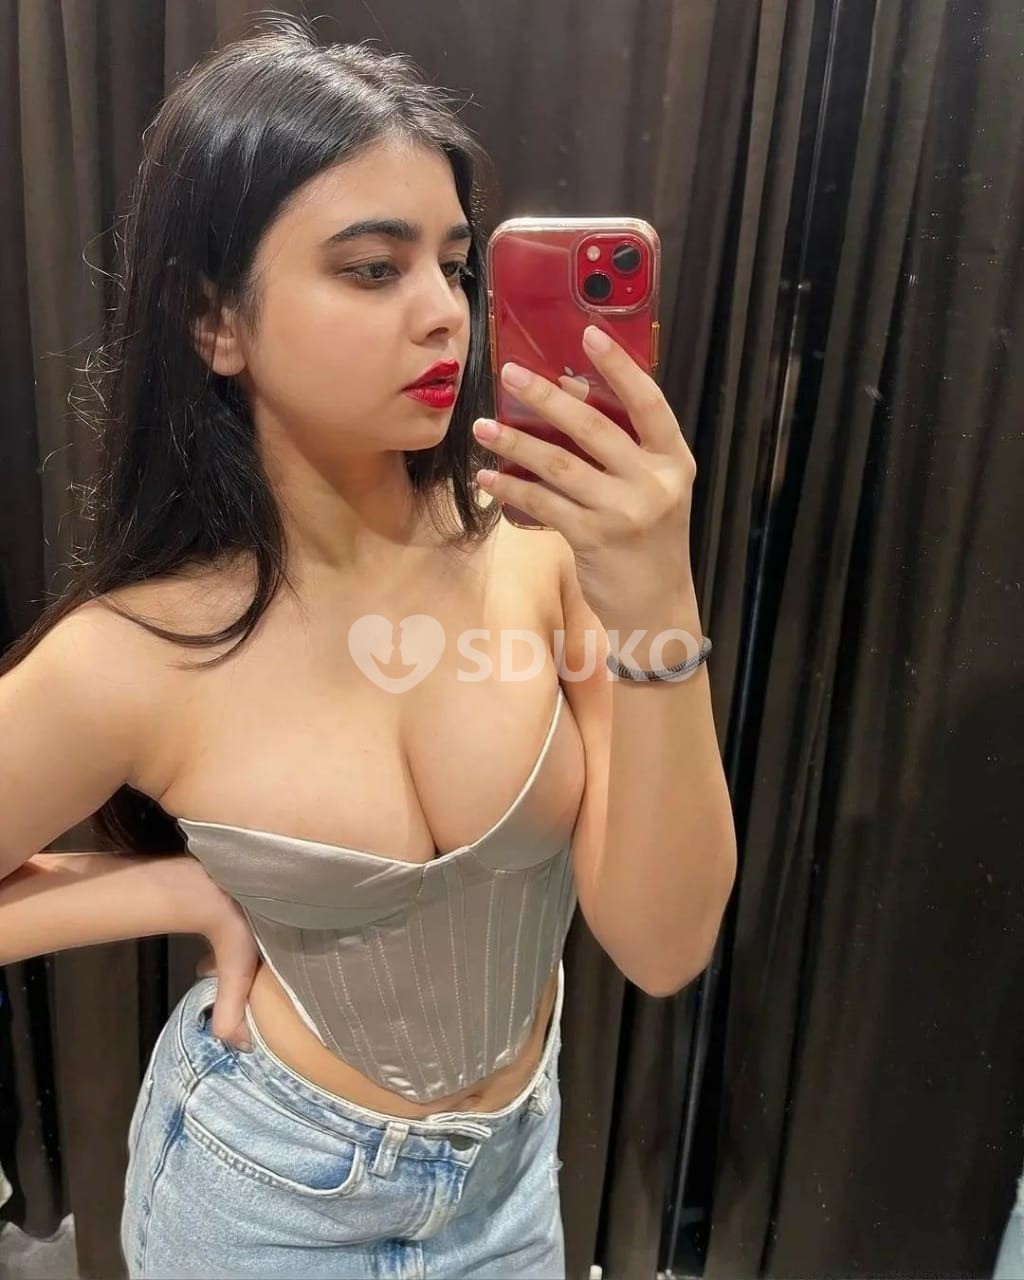 MALAD VIP TODAY LOW PRICE 🔅 🤩 ESCORT 🥰SERVICE 100% SAFE AND SECURE ANYTIME CALL ME 24 X 7 SERVICE AVAILABLE 100